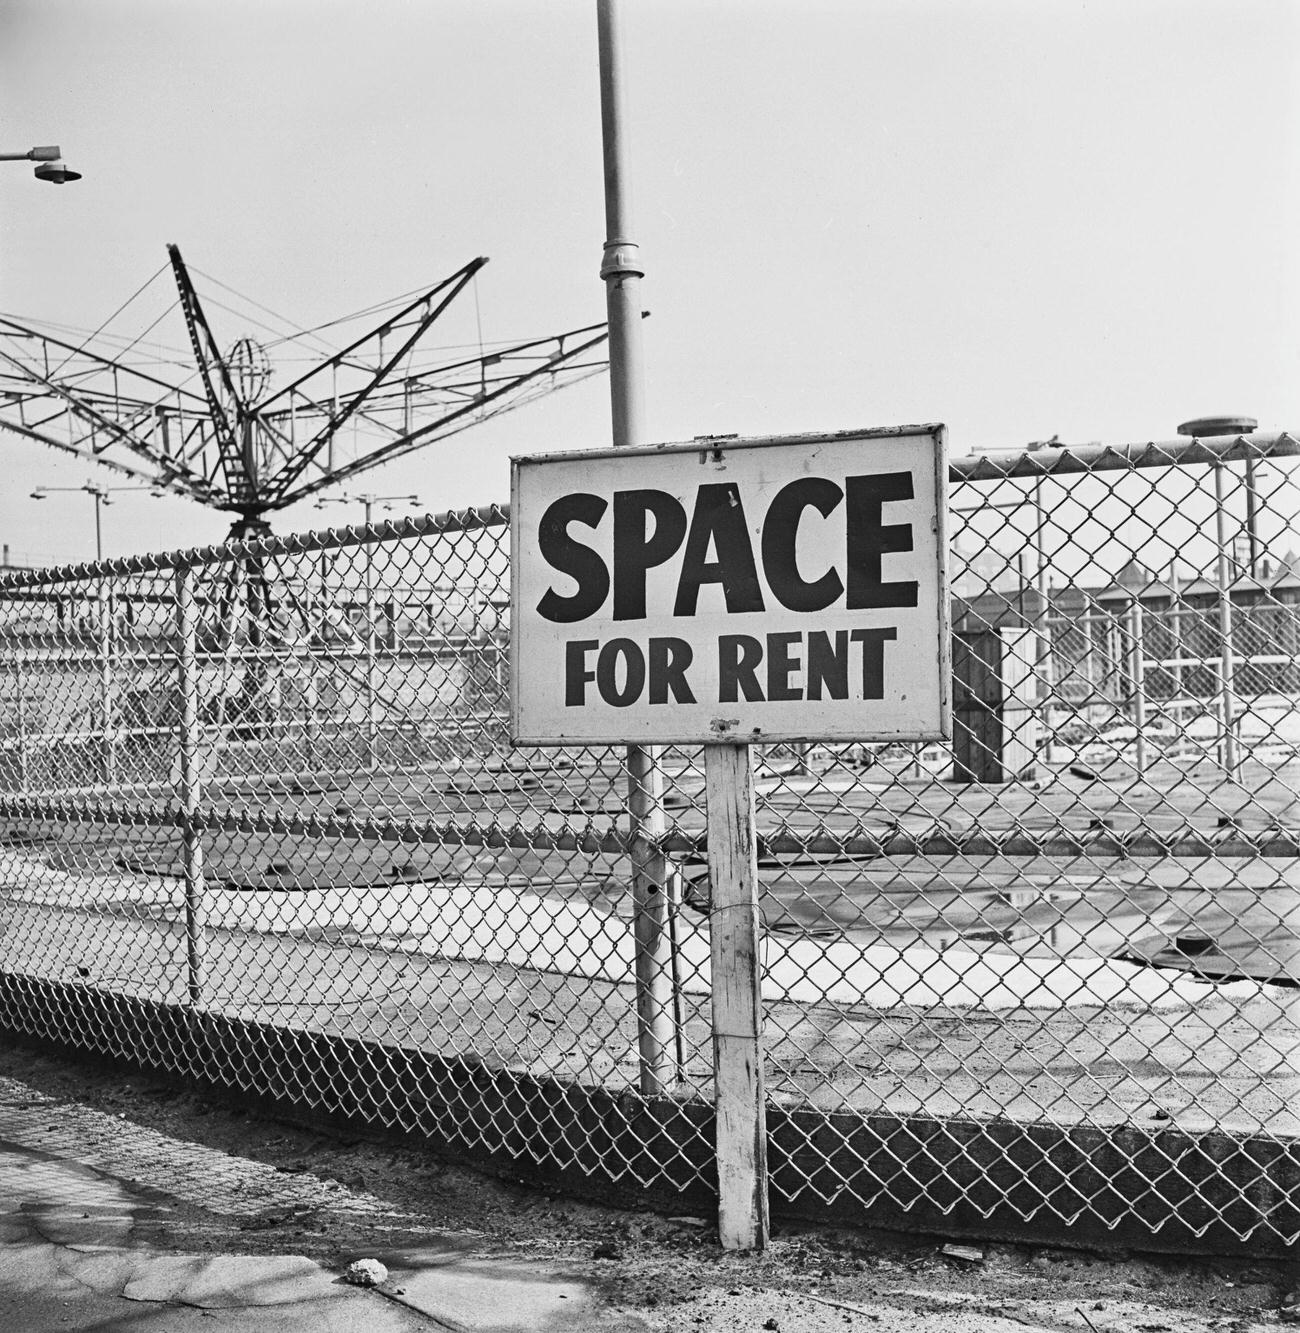 'Space For Rent' Sign With Fairground Ride In Background At Coney Island, 1950